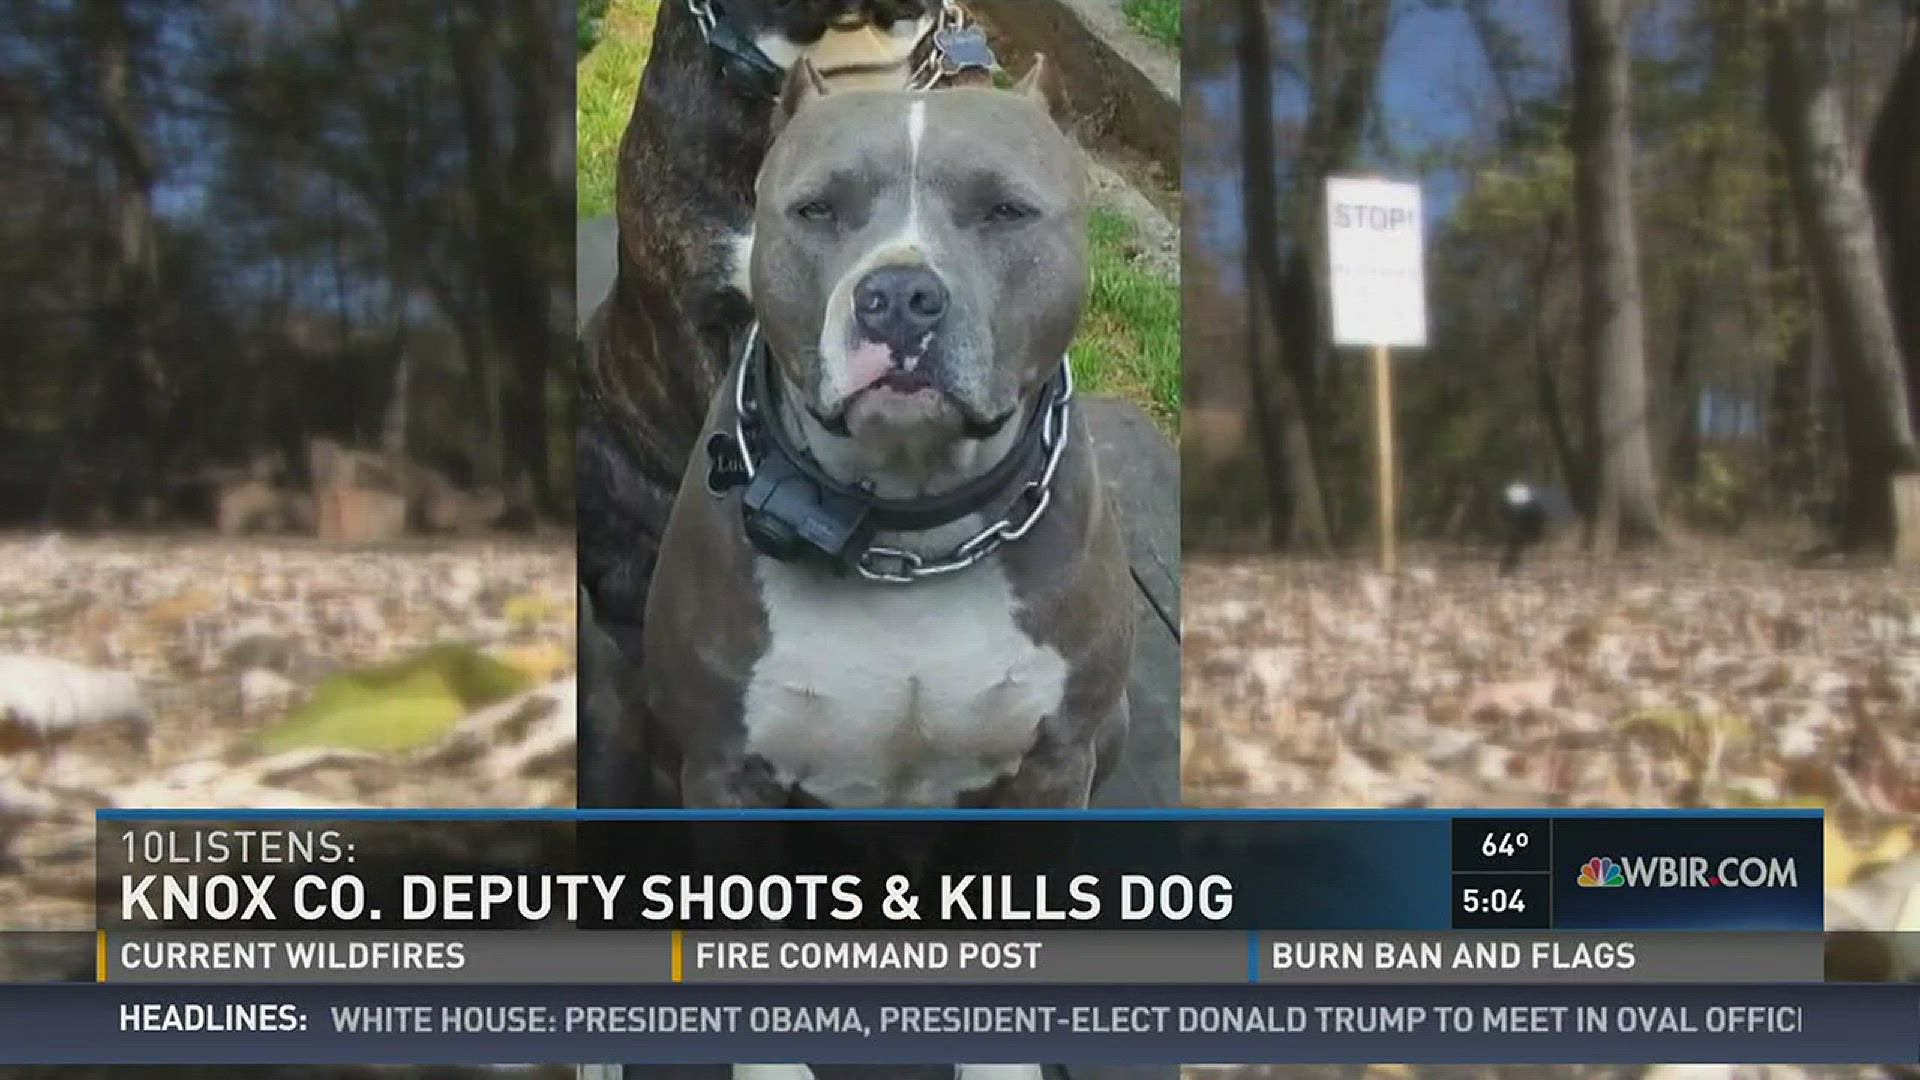 The Knox Co. sheriff says that the dog was being aggressive and the deputy shot the dog in self defense. The dog's owner believed they overreacted.